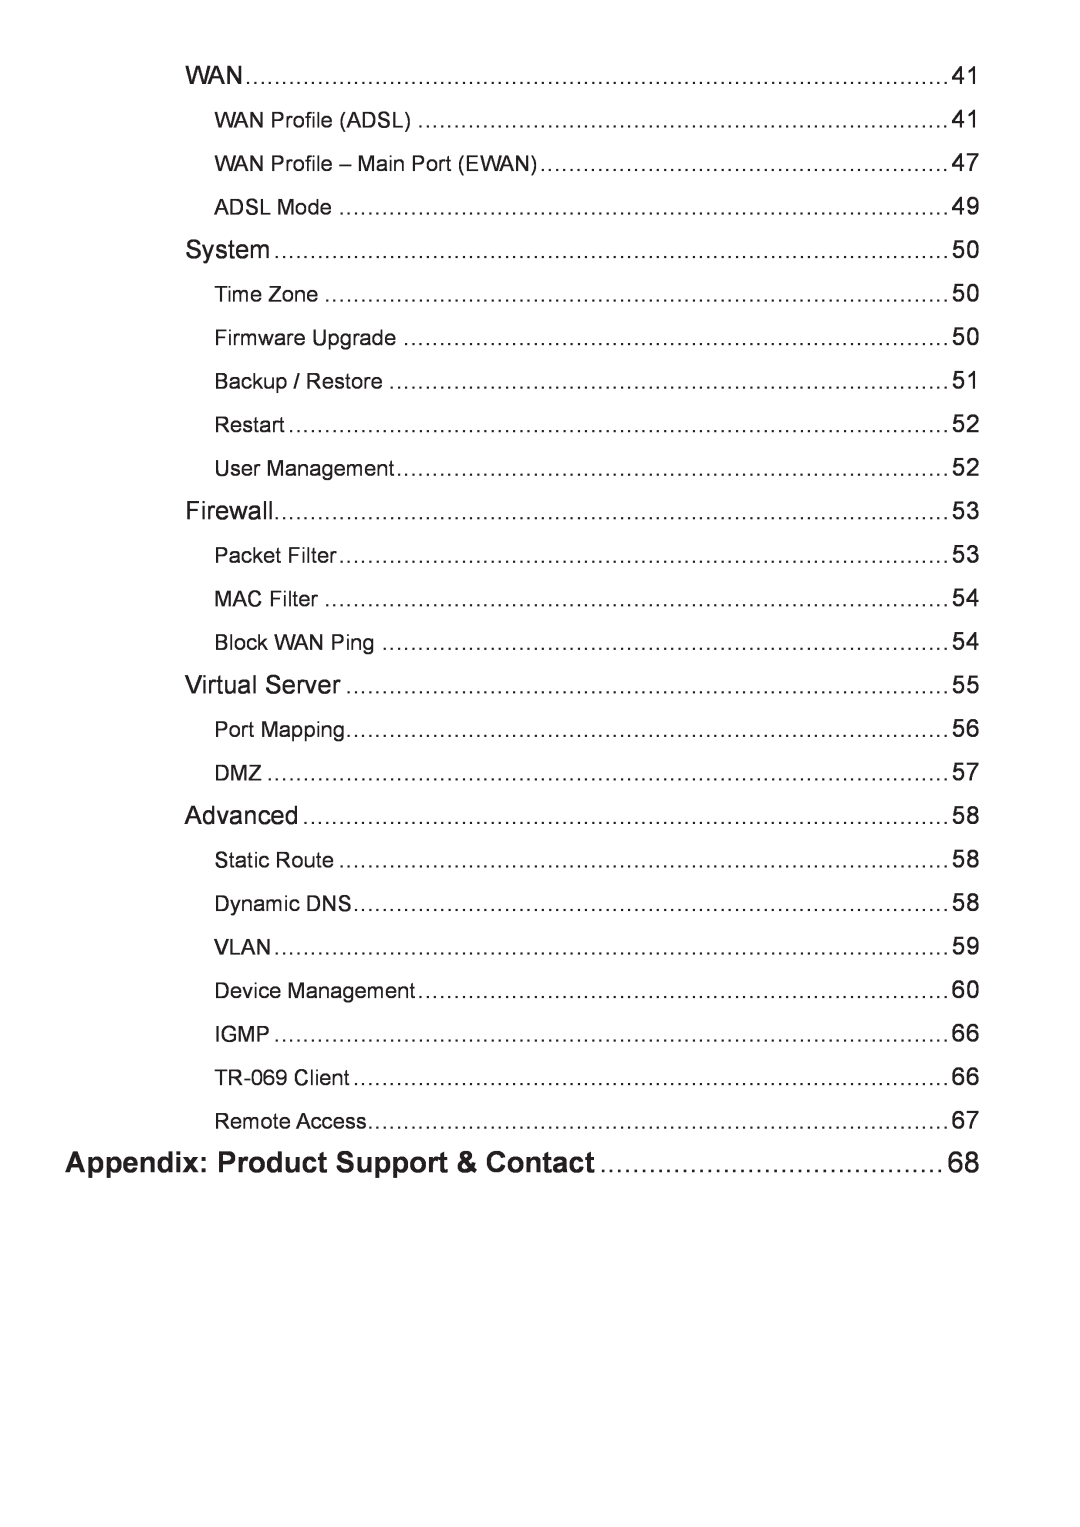 Billion Electric Company 7800 user manual Appendix Product Support & Contact 